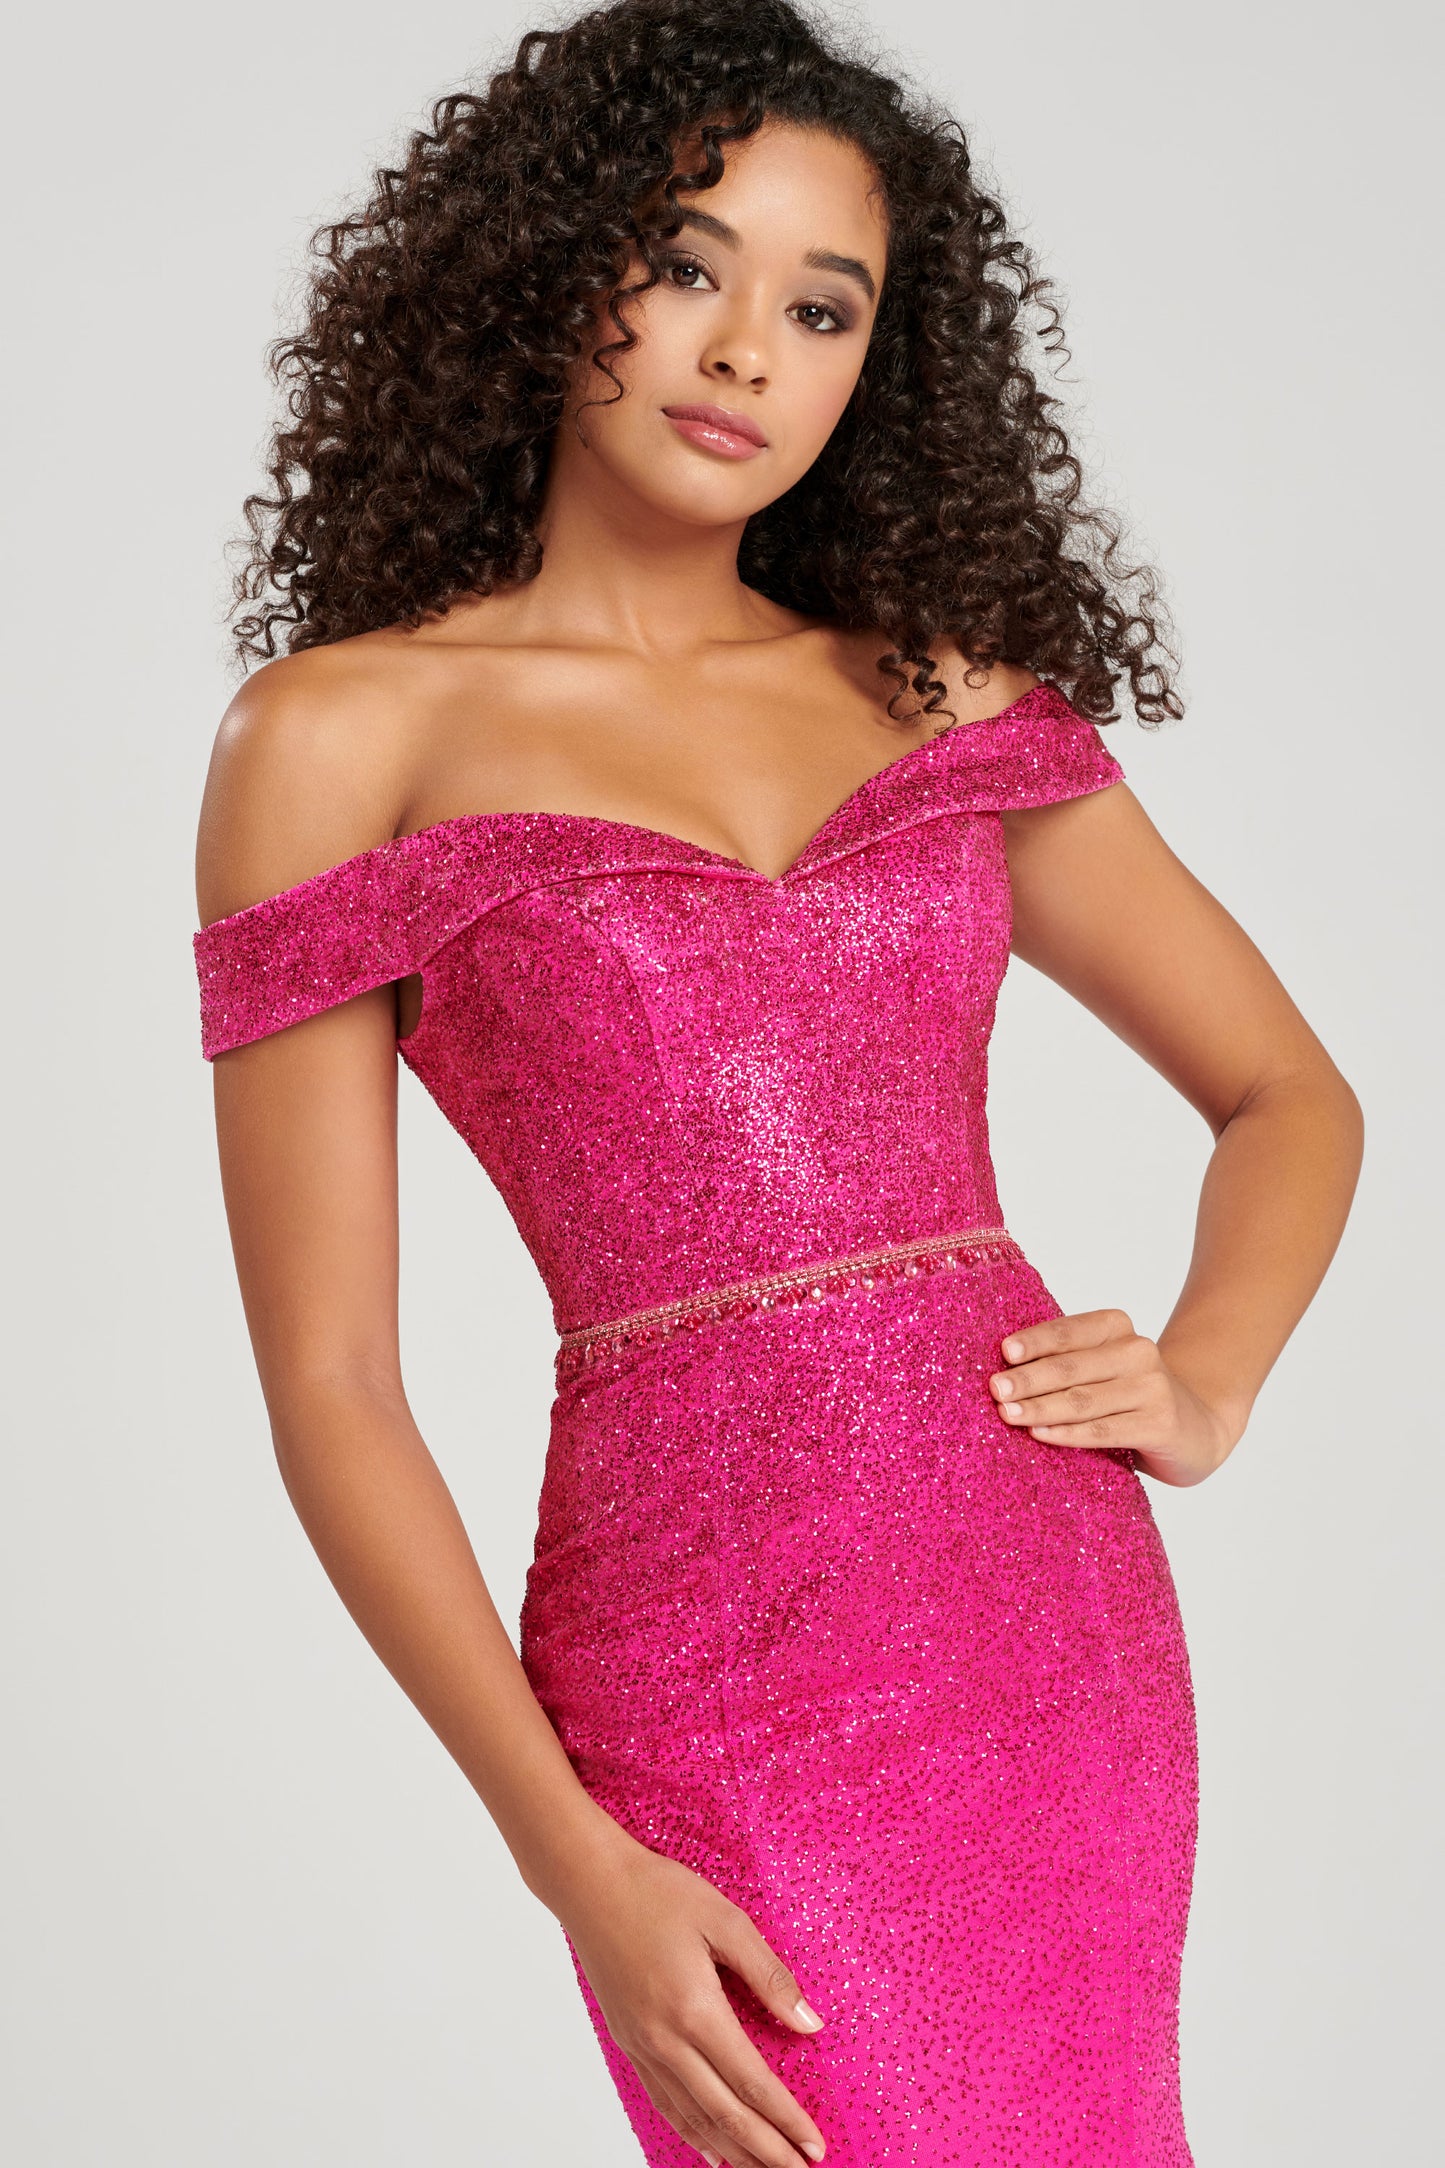 Ellie Wilde EW120028 - EW 120028 Sleeveless sequin lace fit and flare gown with a plunging V-neck, natural waist, criss cross back, horsehair hem and a sweep train. Glittering V-neckline evening gown by Ellie Wilde